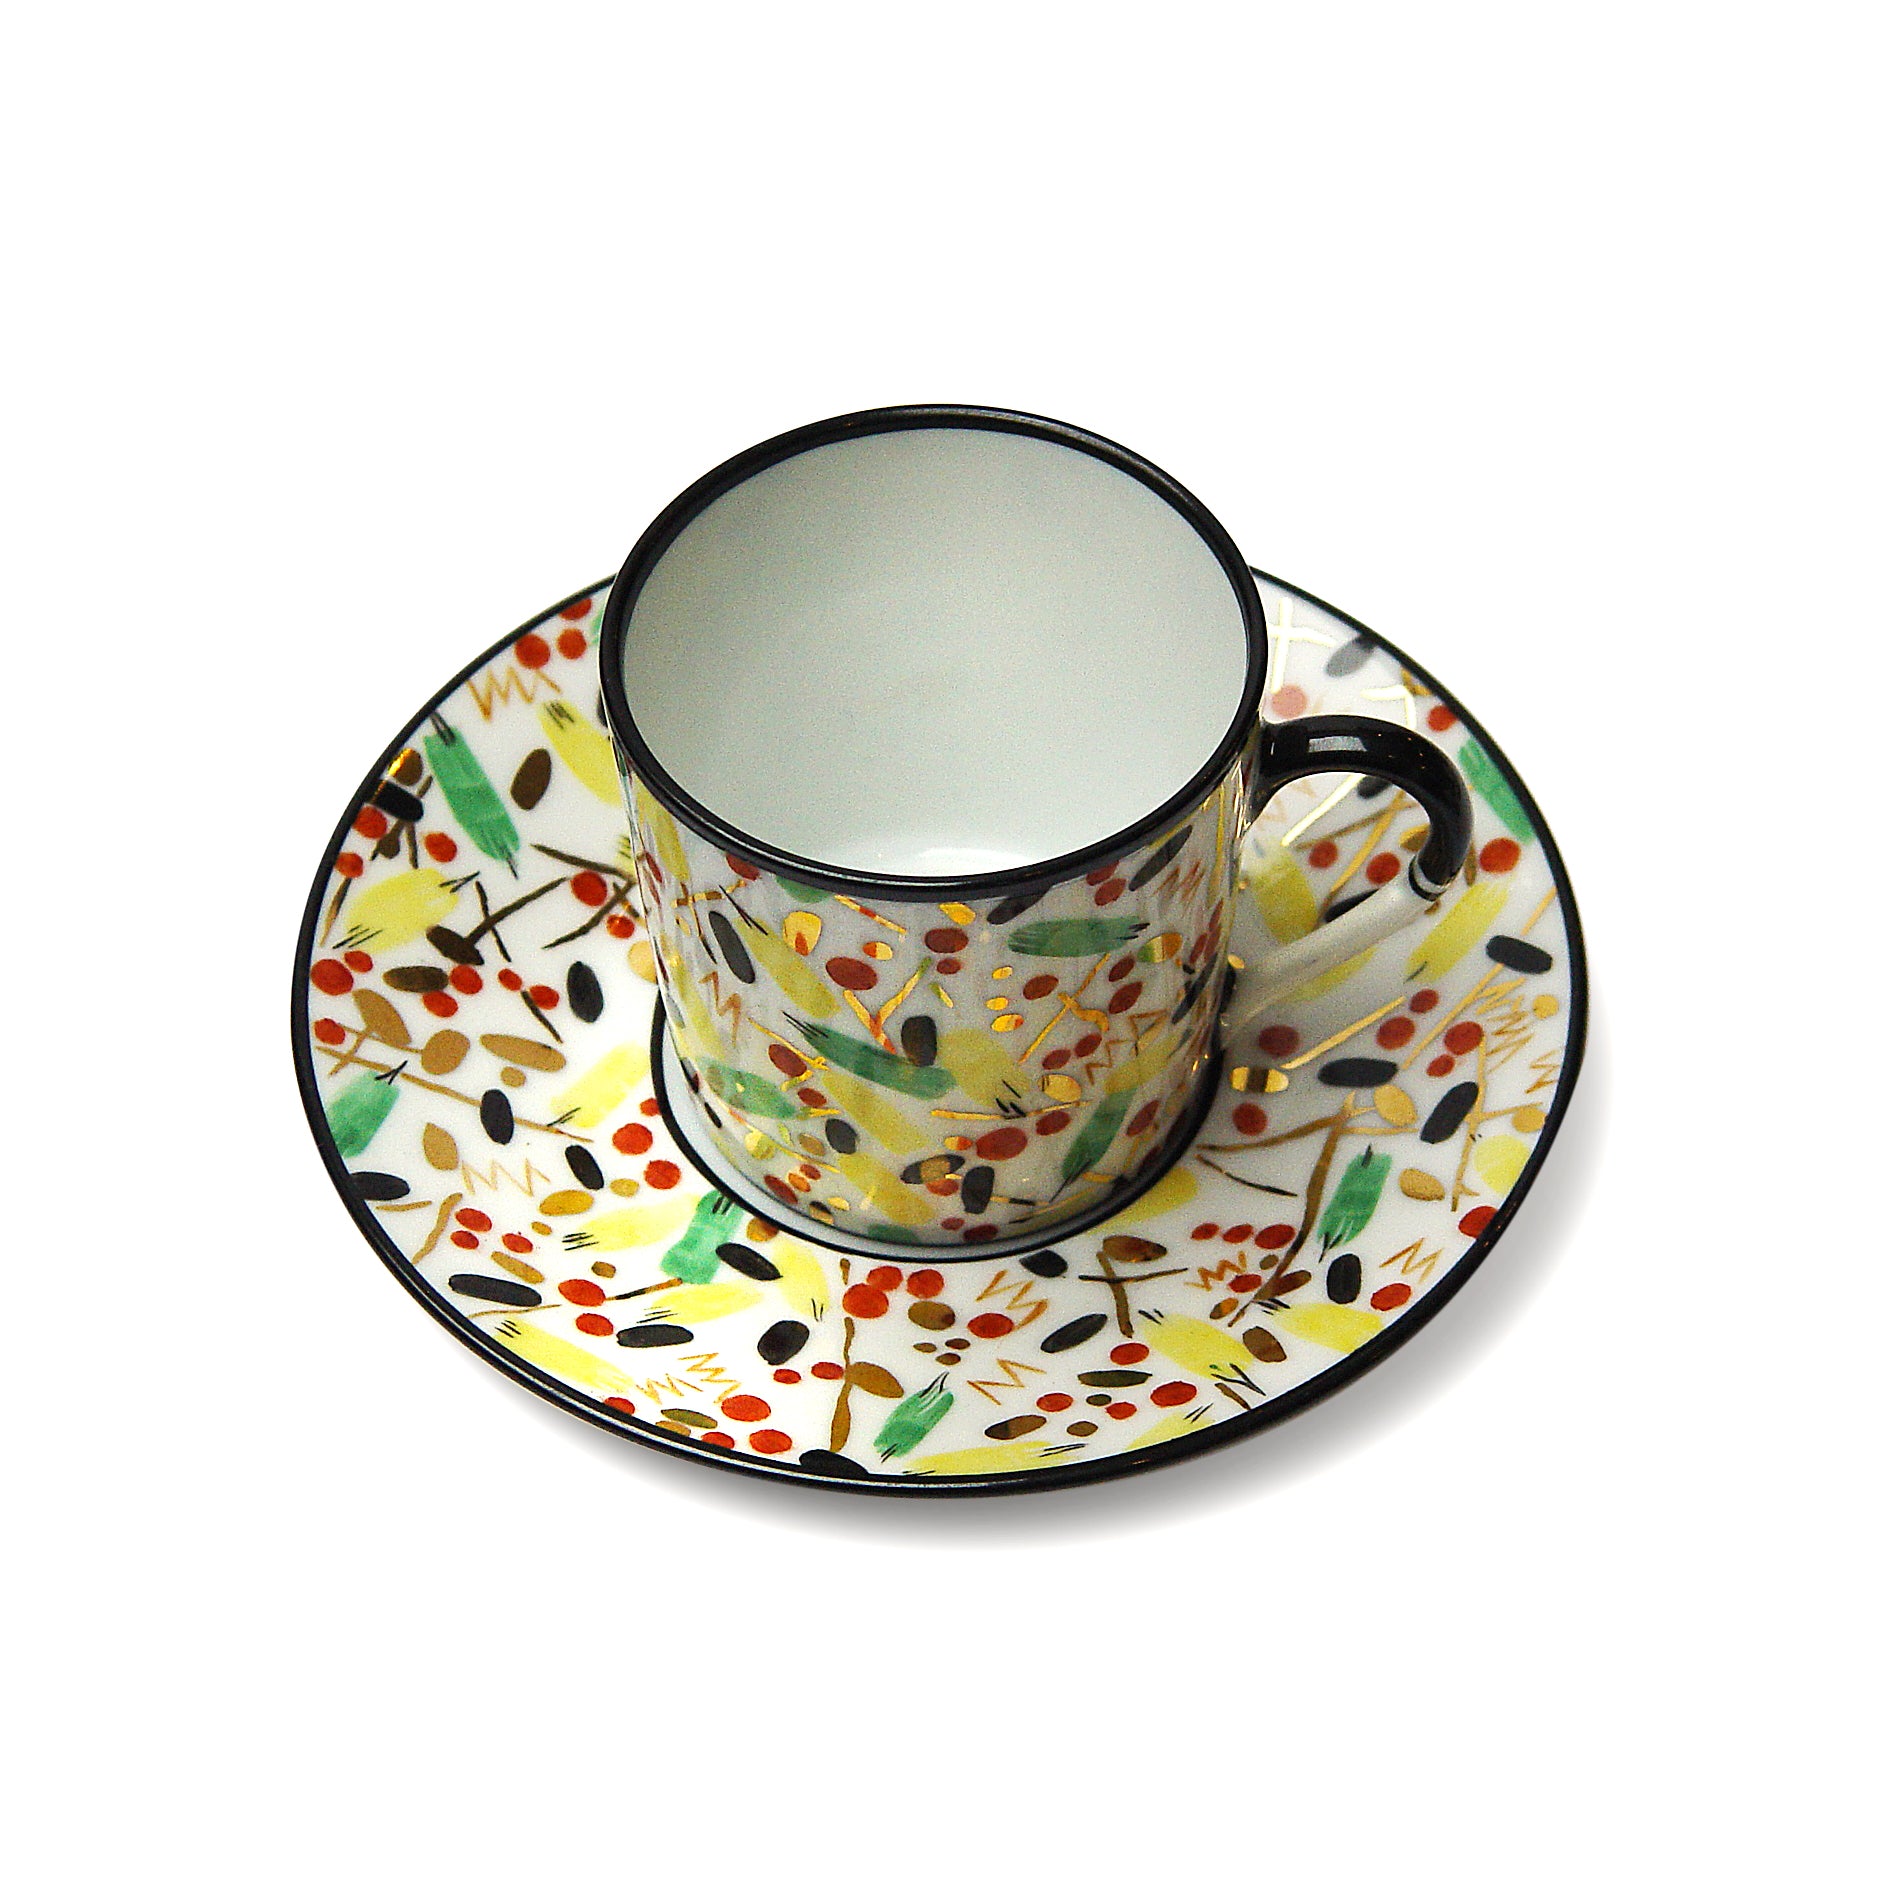 Renouveau Russe - Coffee cup and saucer
